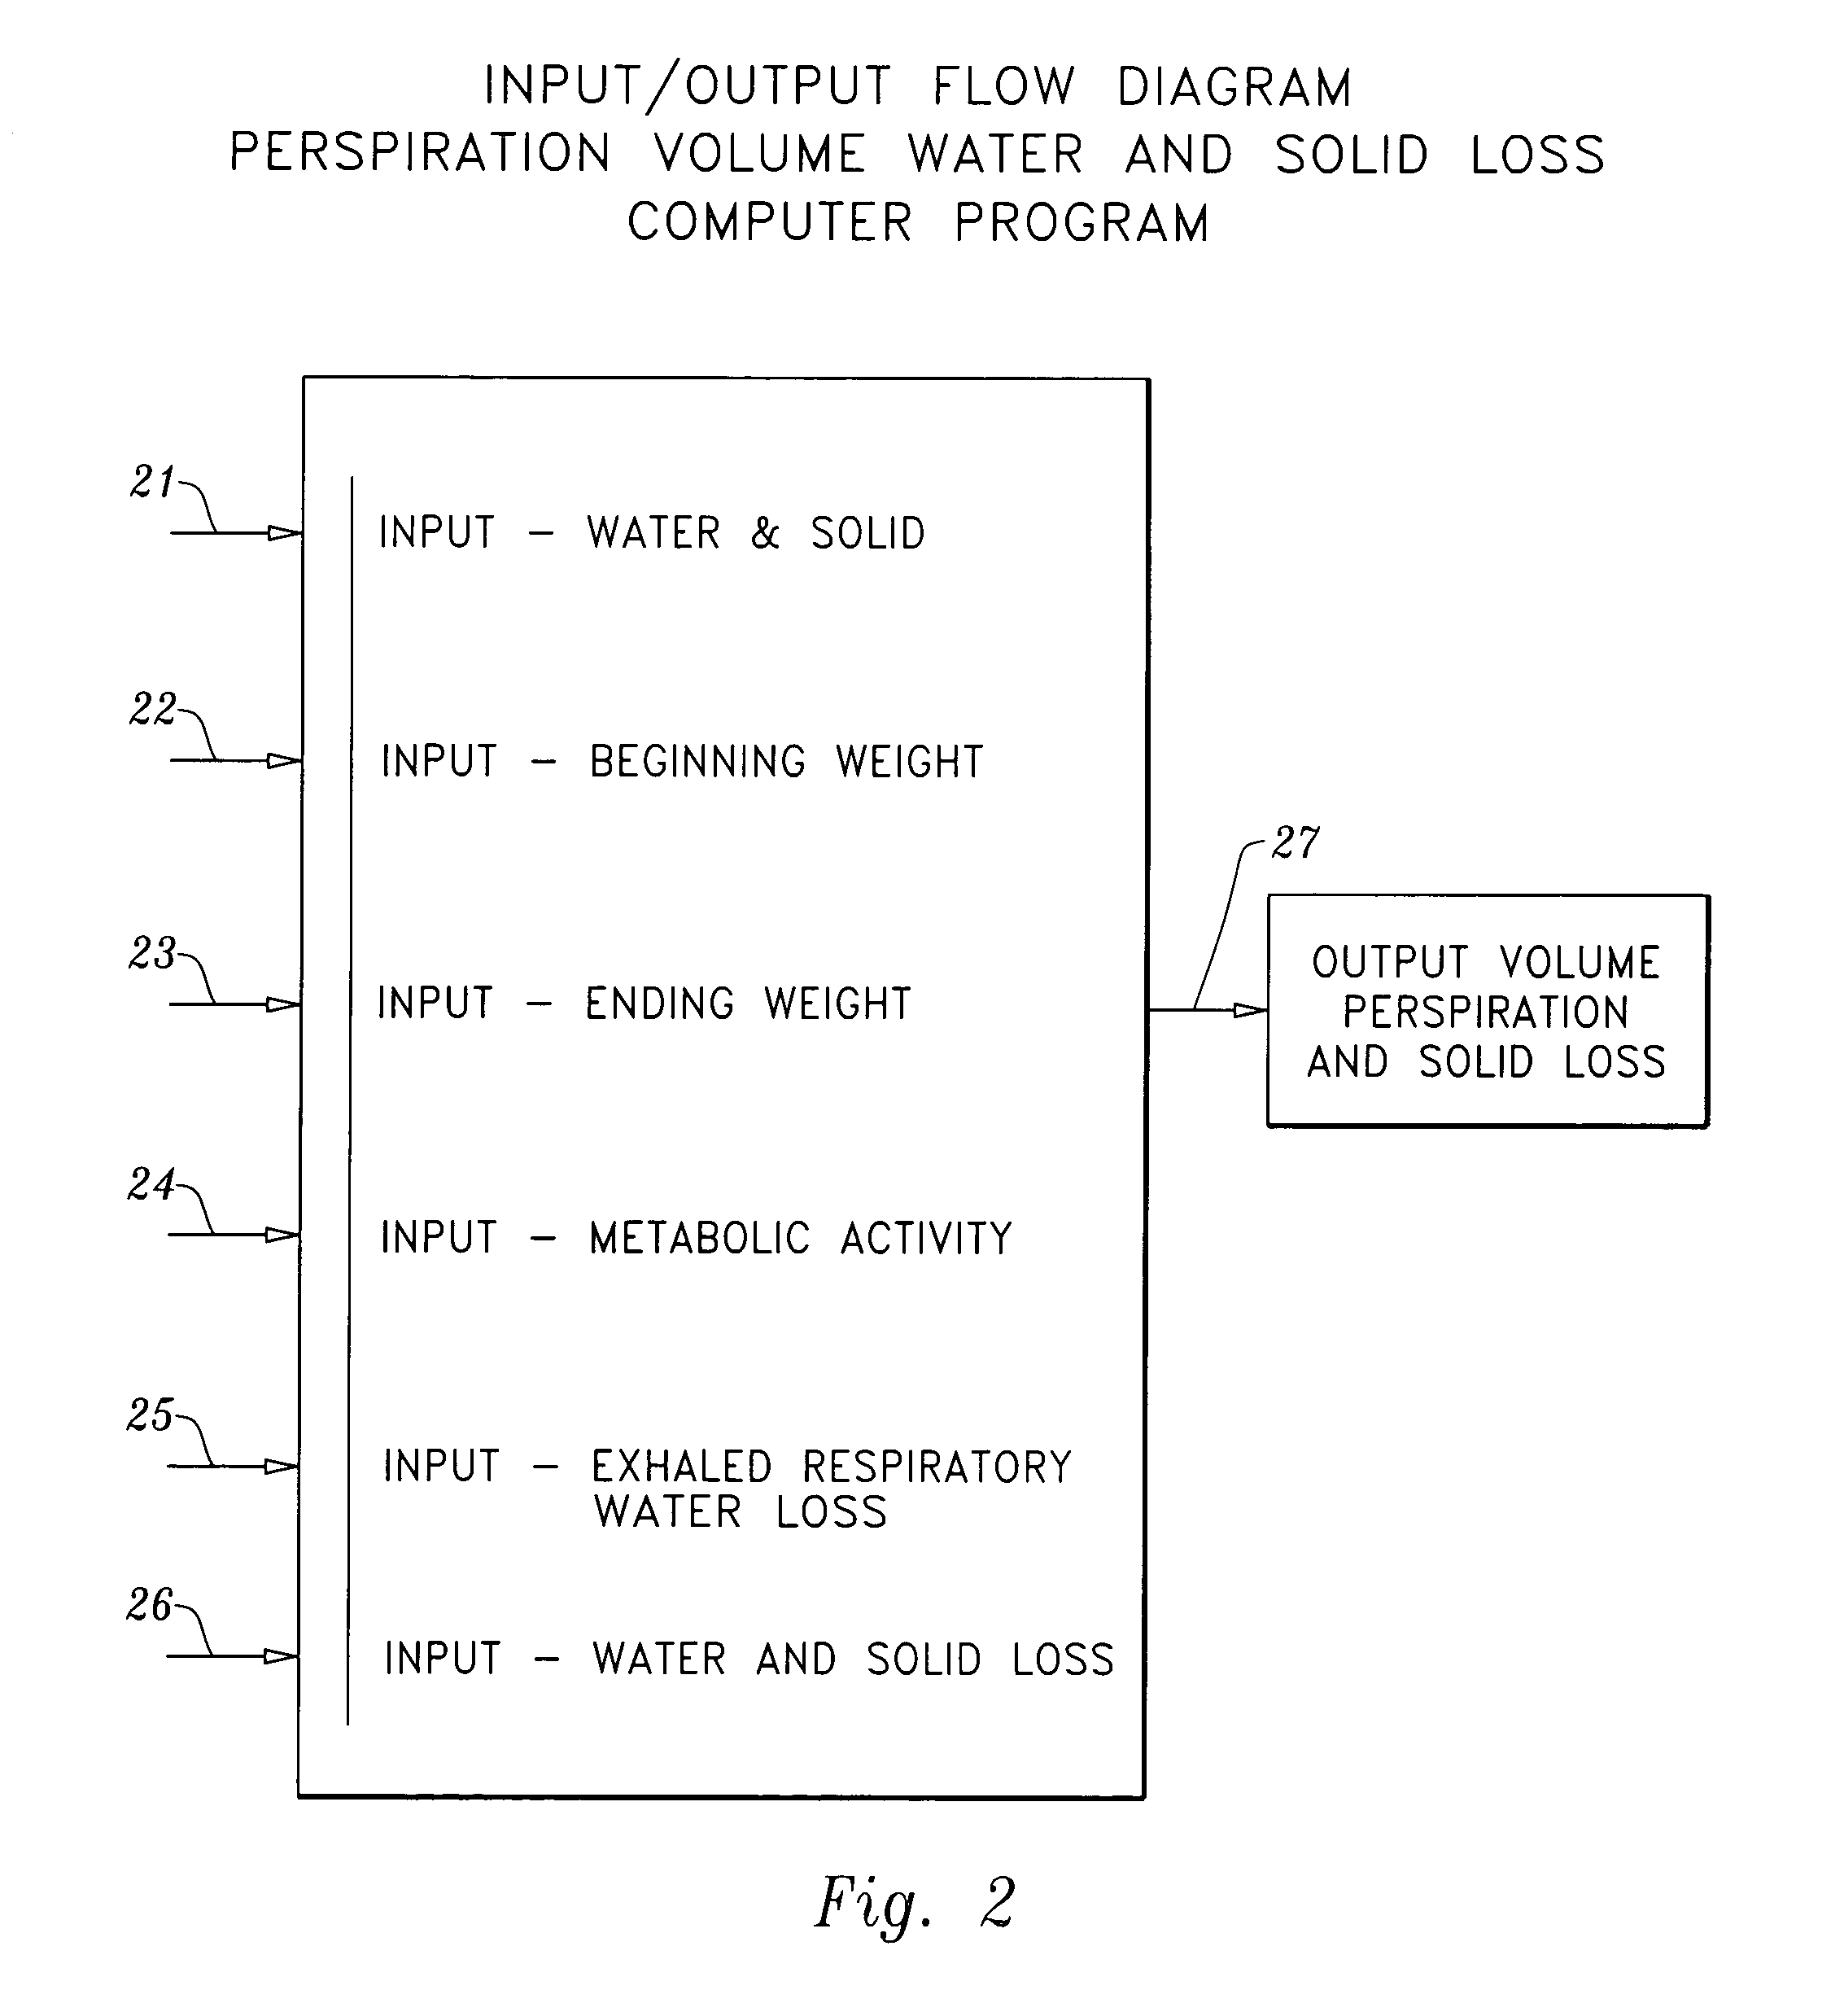 Apparatus and method for increasing, monitoring, measuring, and controlling perspiratory water and solid loss at reduced ambient pressure